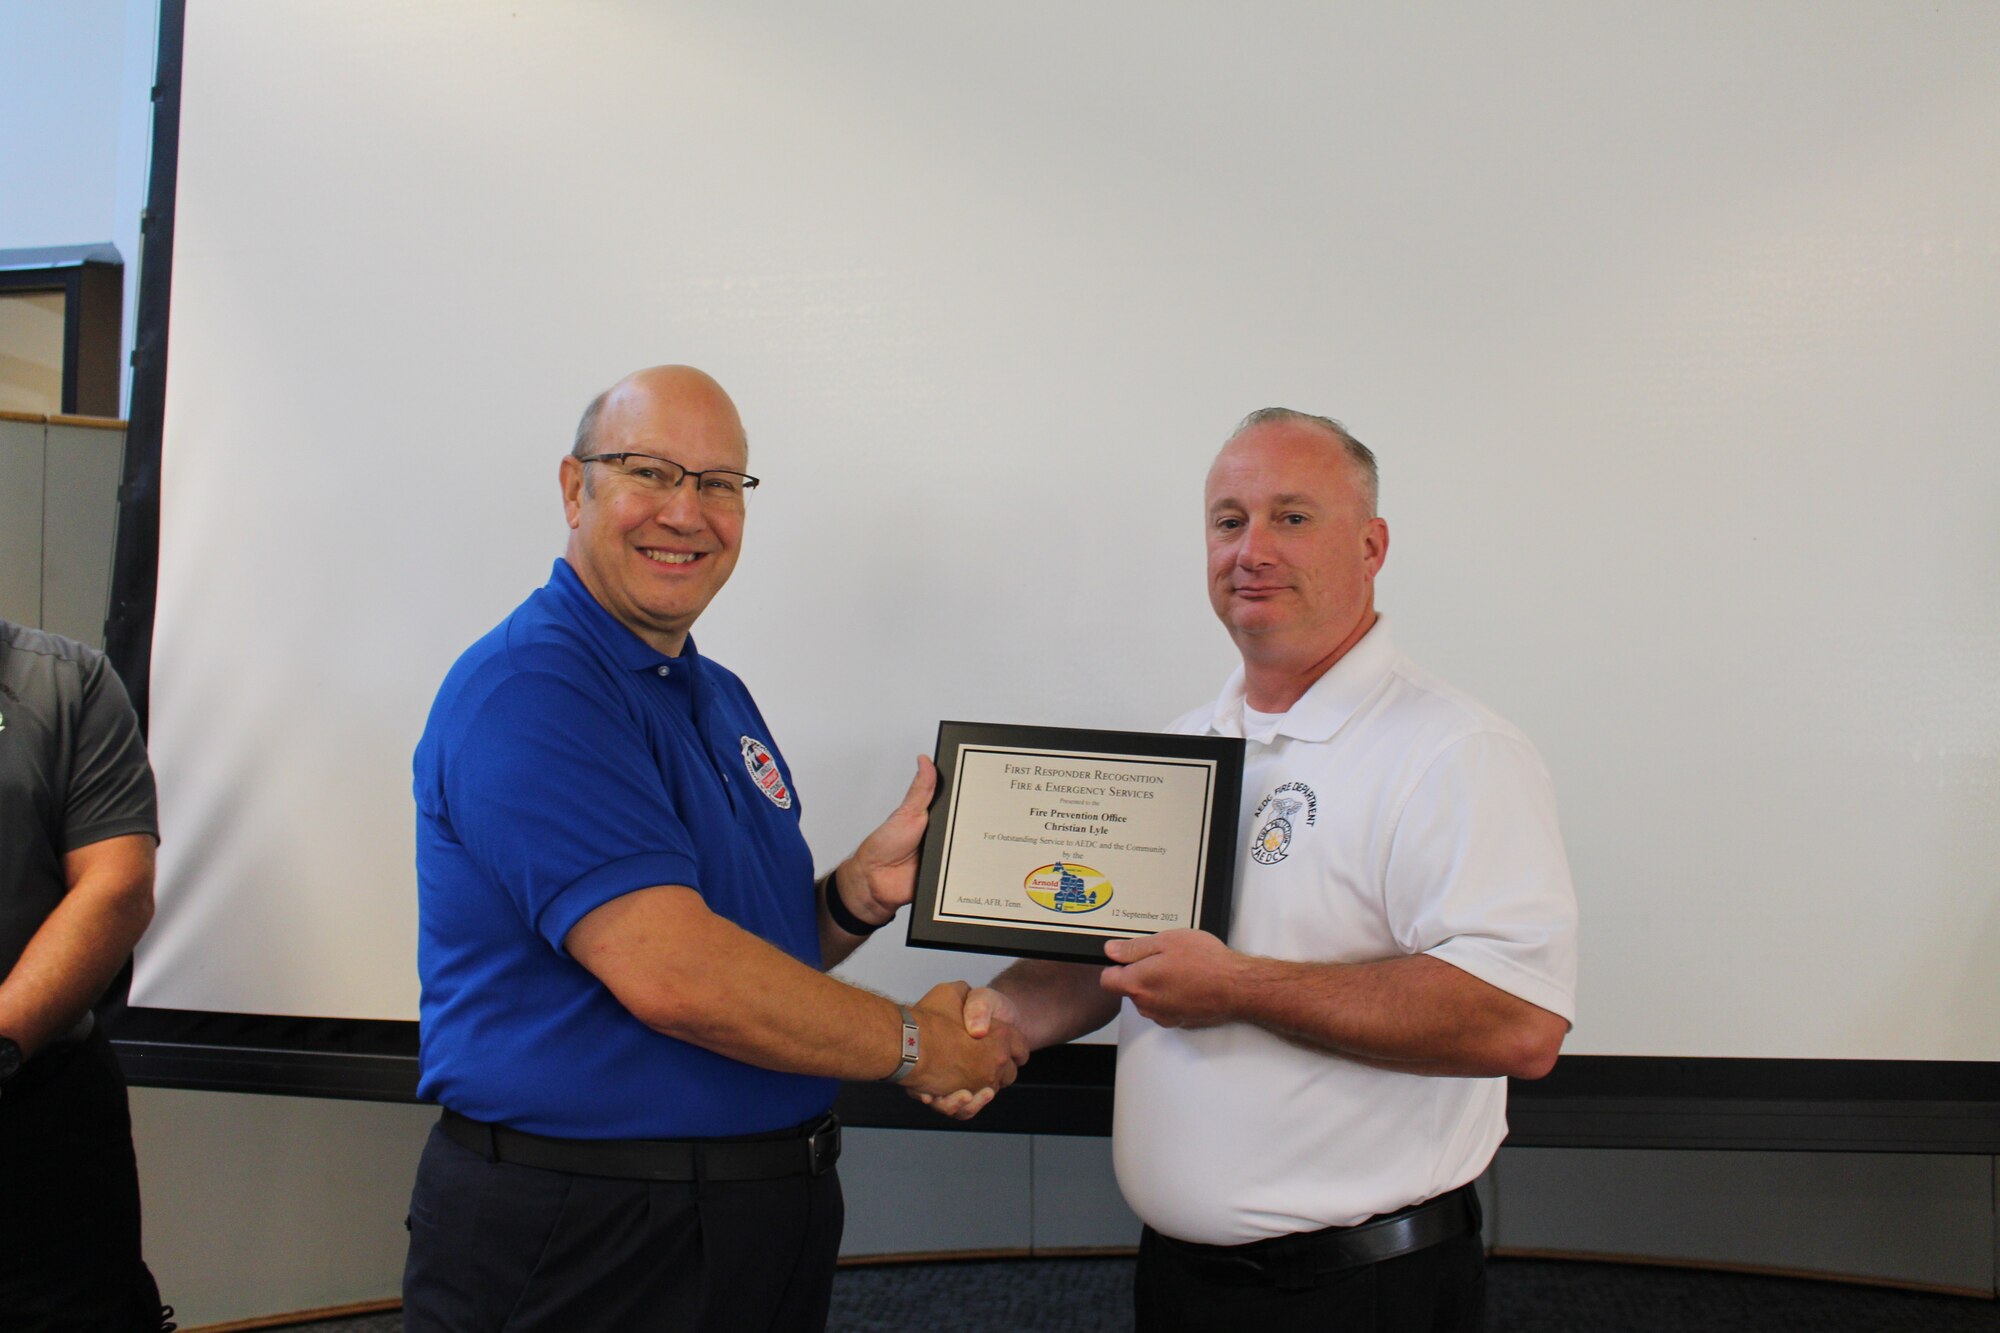 Glenn Liston, Arnold Community Council president, left, presents Christian Lyle, fire prevention officer with Arnold Air Force Base Fire and Emergency Services with a plaque after recognizing him as an outstanding first responder during a meeting of the ACC at the Gossick Leadership Center at Arnold AFB, Tenn., headquarters of Arnold Engineering Development Complex, Sept. 12, 2023. Lyle was one of three recipients of the 2023 Arnold Community Council First Responder Awards. (U.S. Air Force photo by Kali Bradford)